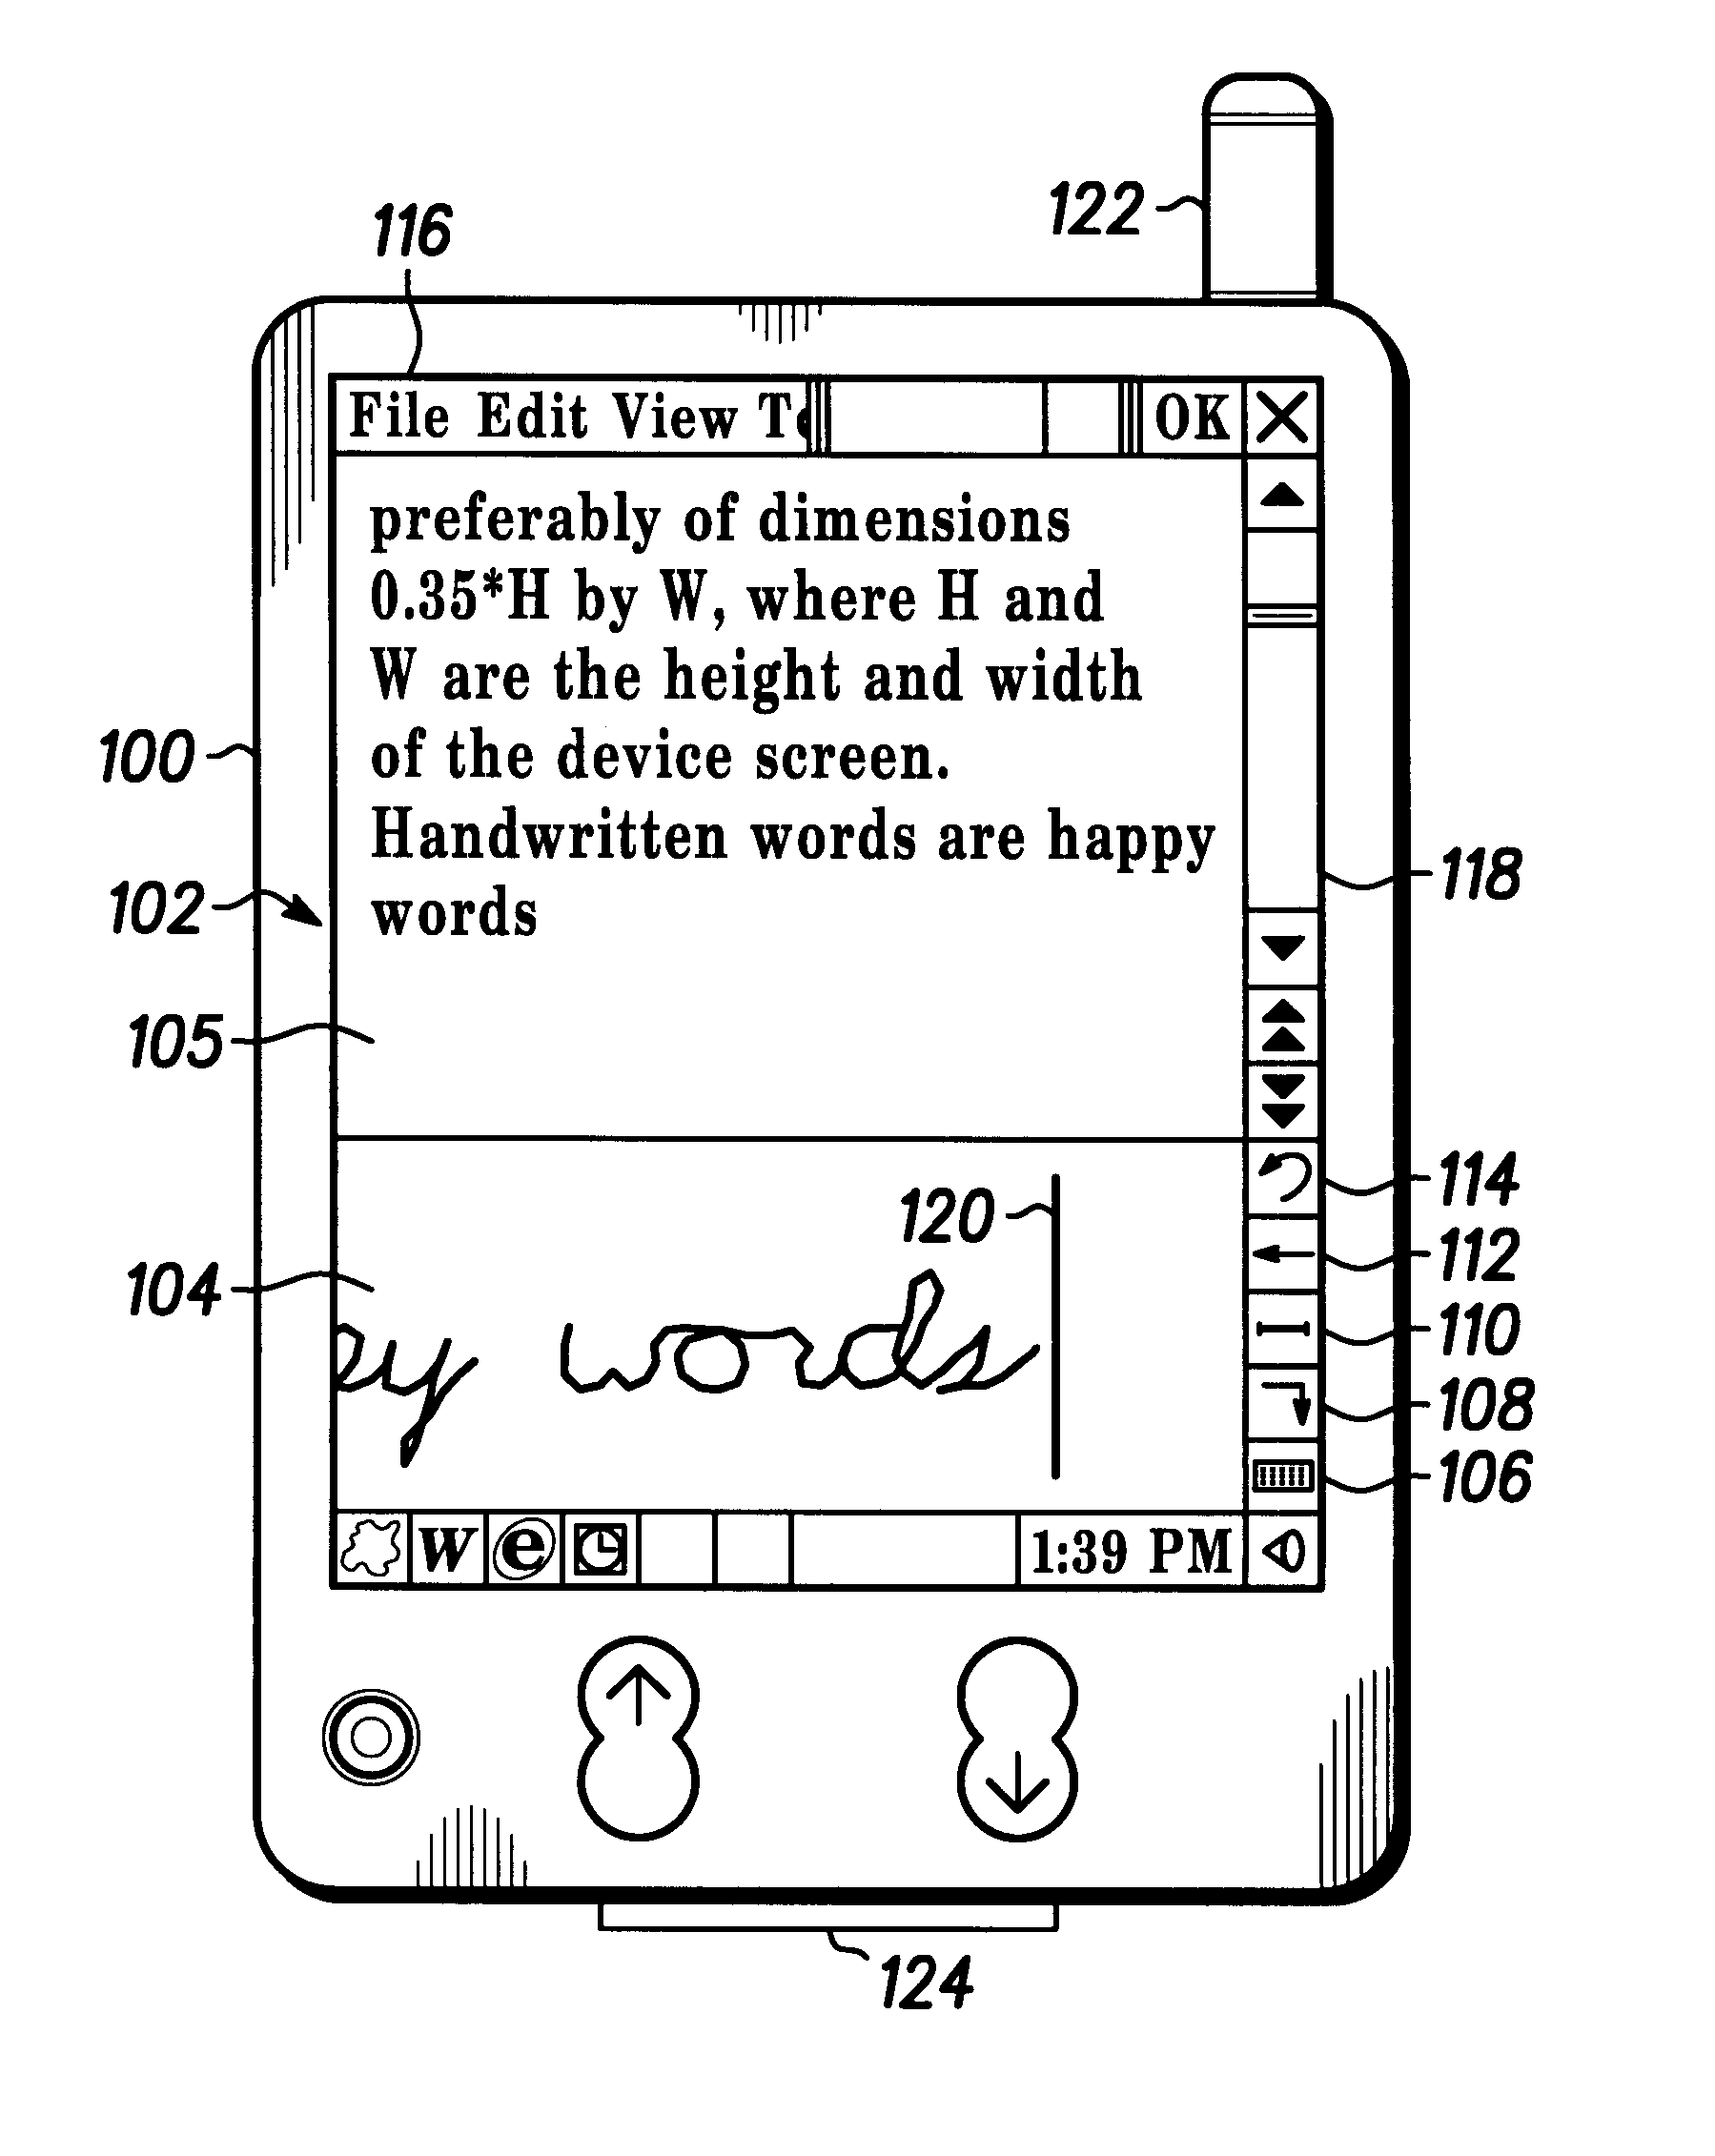 Automatically scrolling handwritten input user interface for personal digital assistants and the like